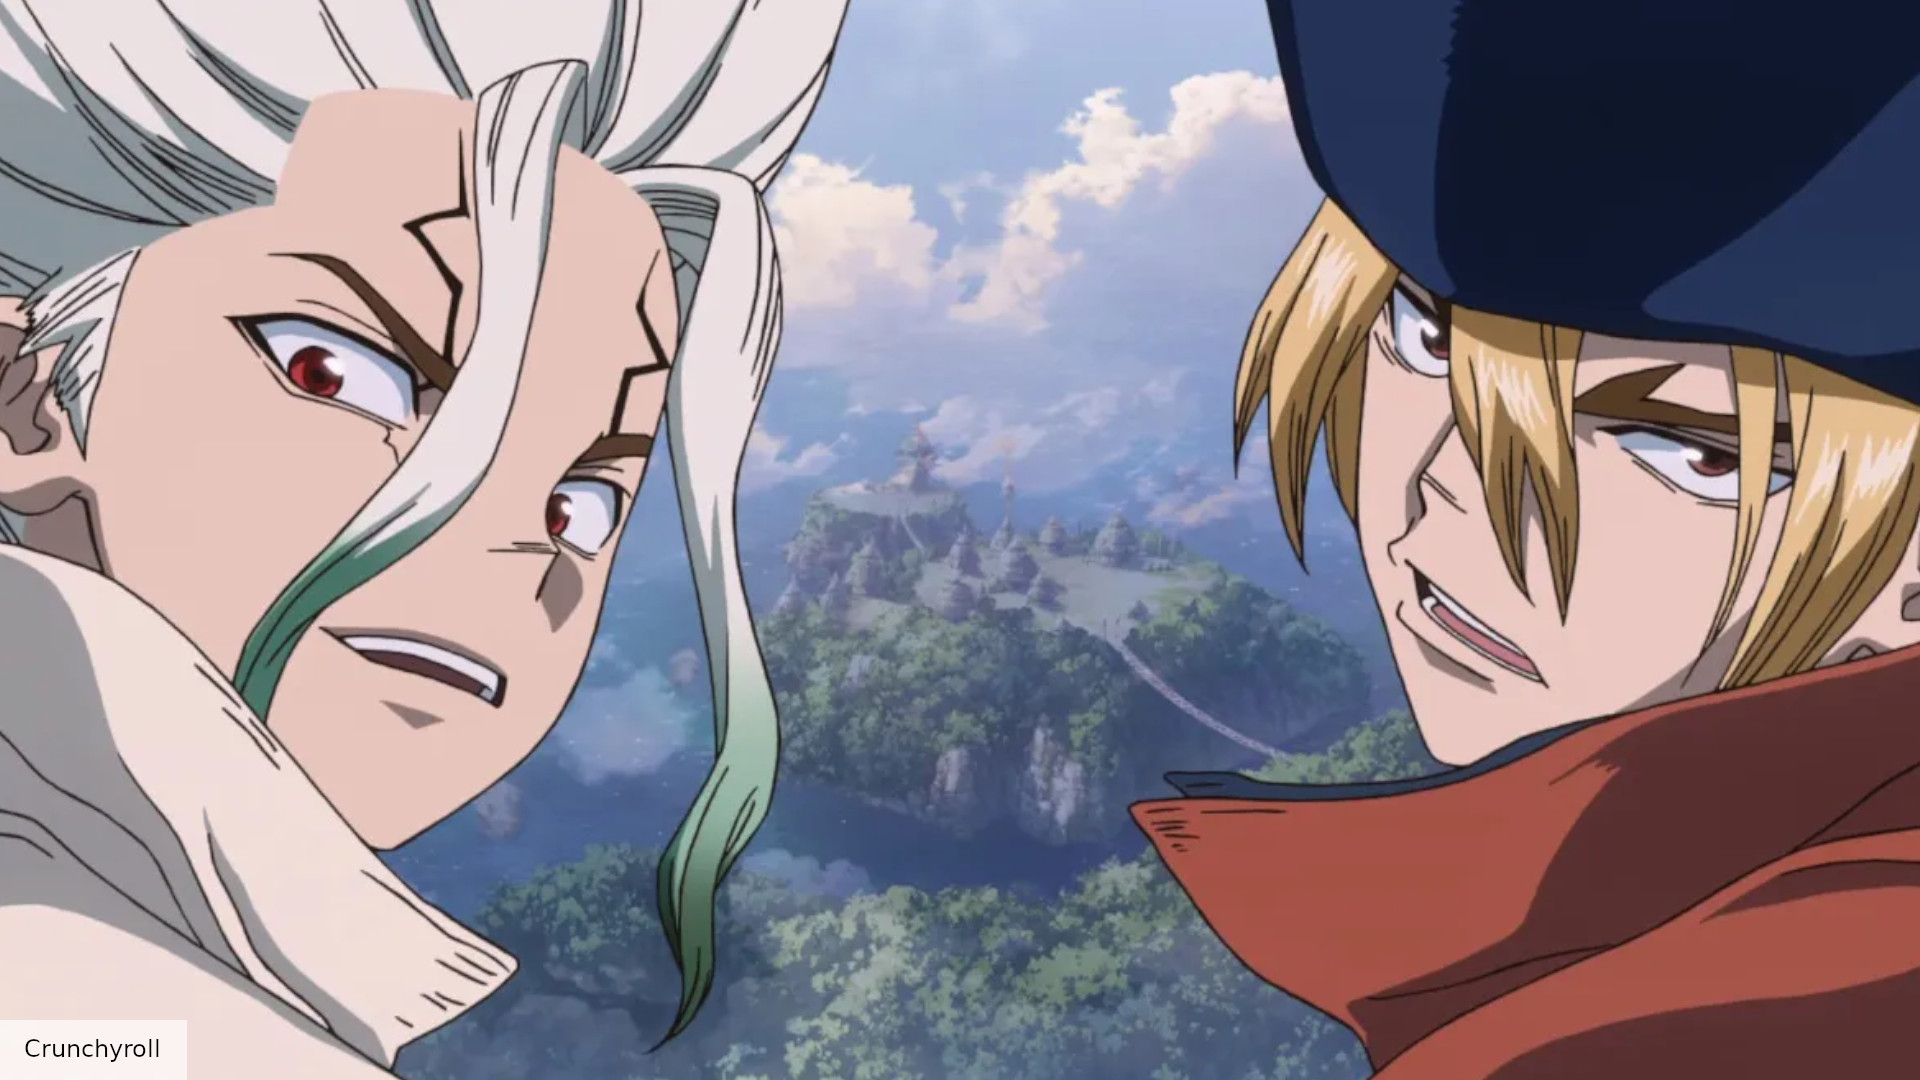 Dr. Stone Season 3 Releases New Trailer: Watch